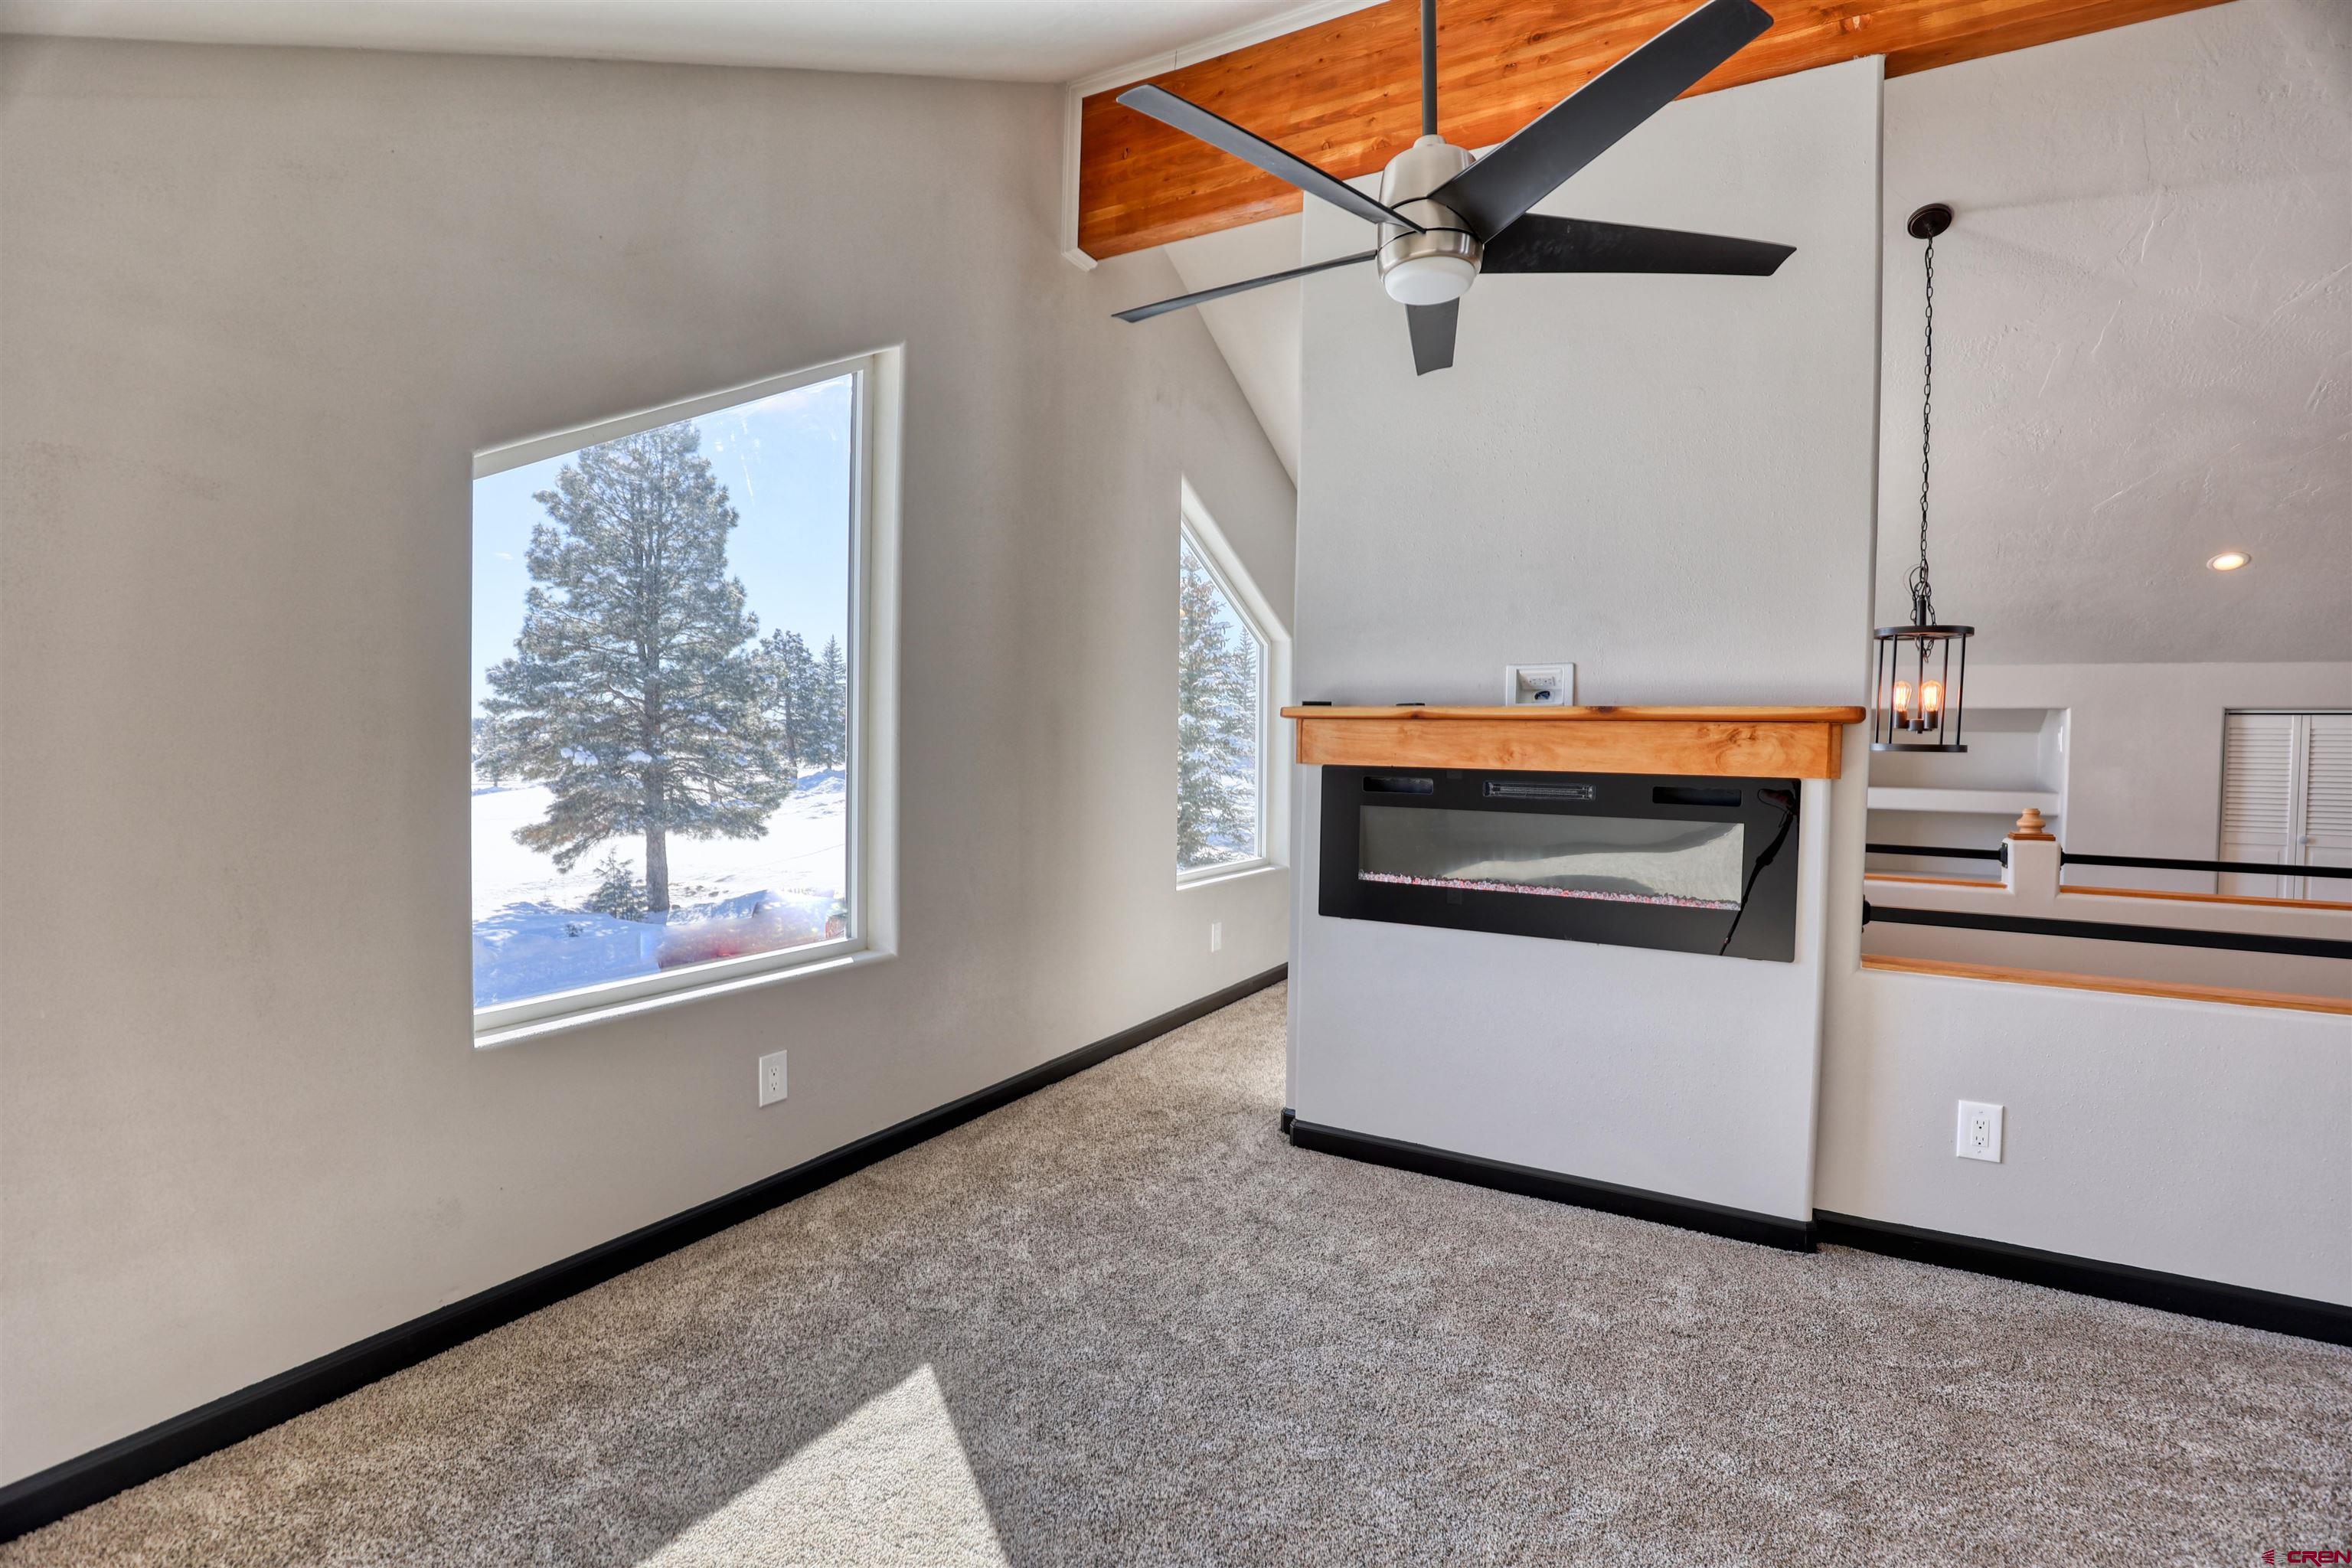 66 Pines Club Place, Pagosa Springs, CO 81147 Listing Photo  30